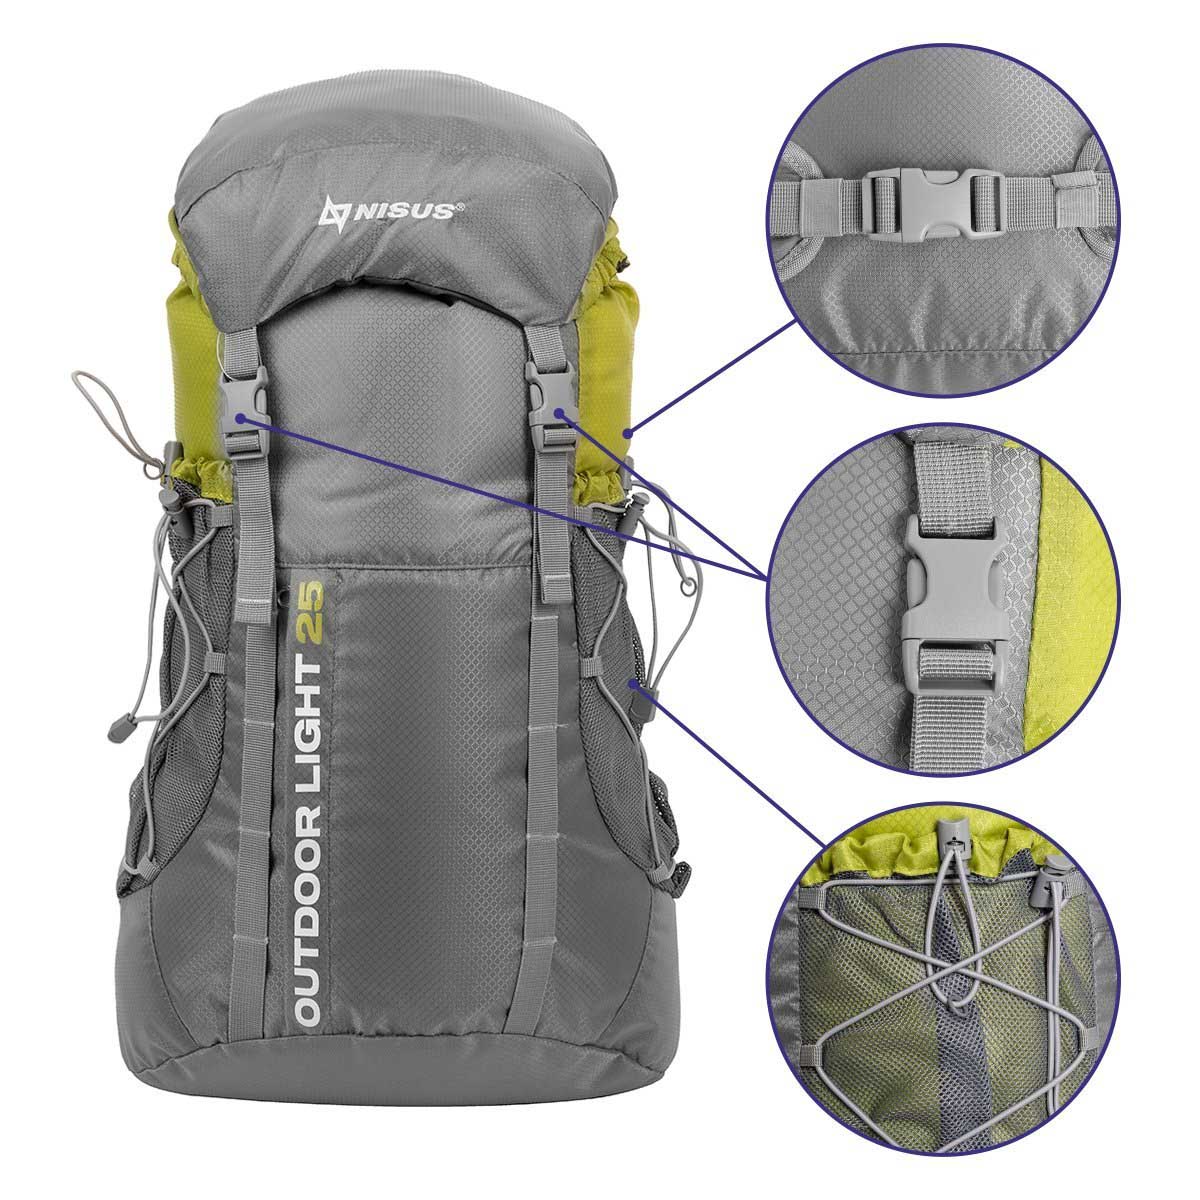 NEW - Outdoor Products Backpack, 25L, HIKING, SCHOOL, CAMPING, FISHING, GYM